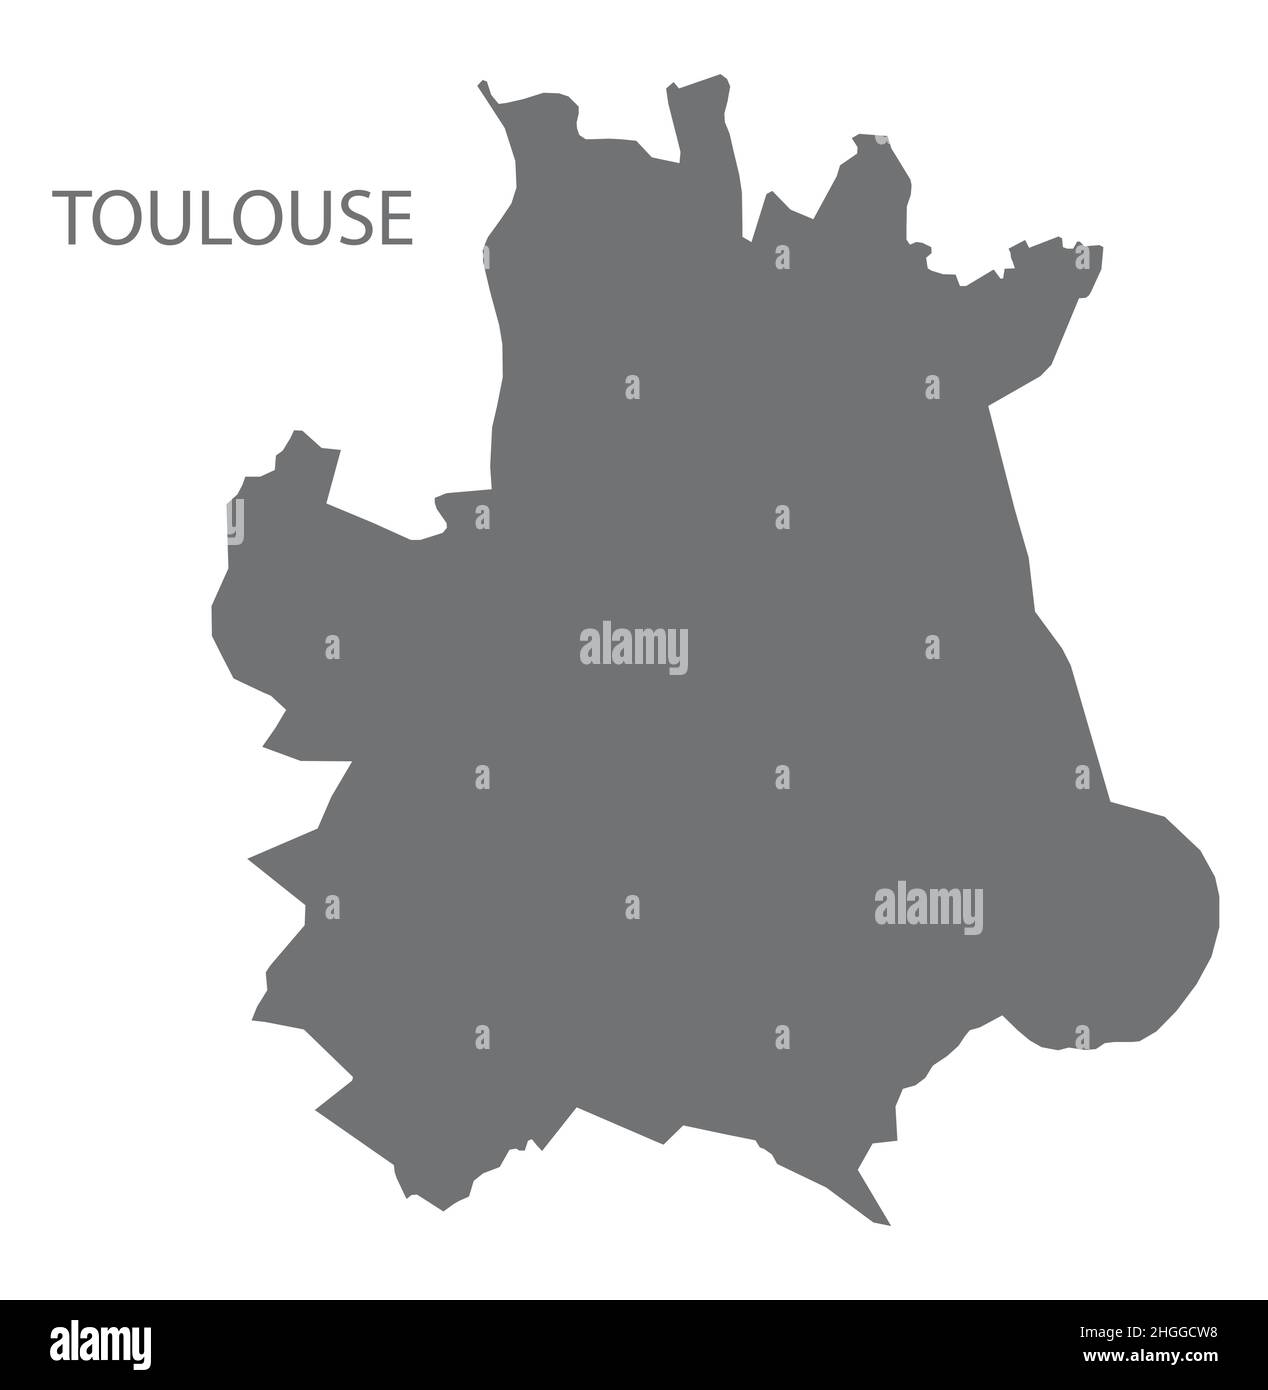 Toulouse city map grey illustration silhouette shape Stock Vector